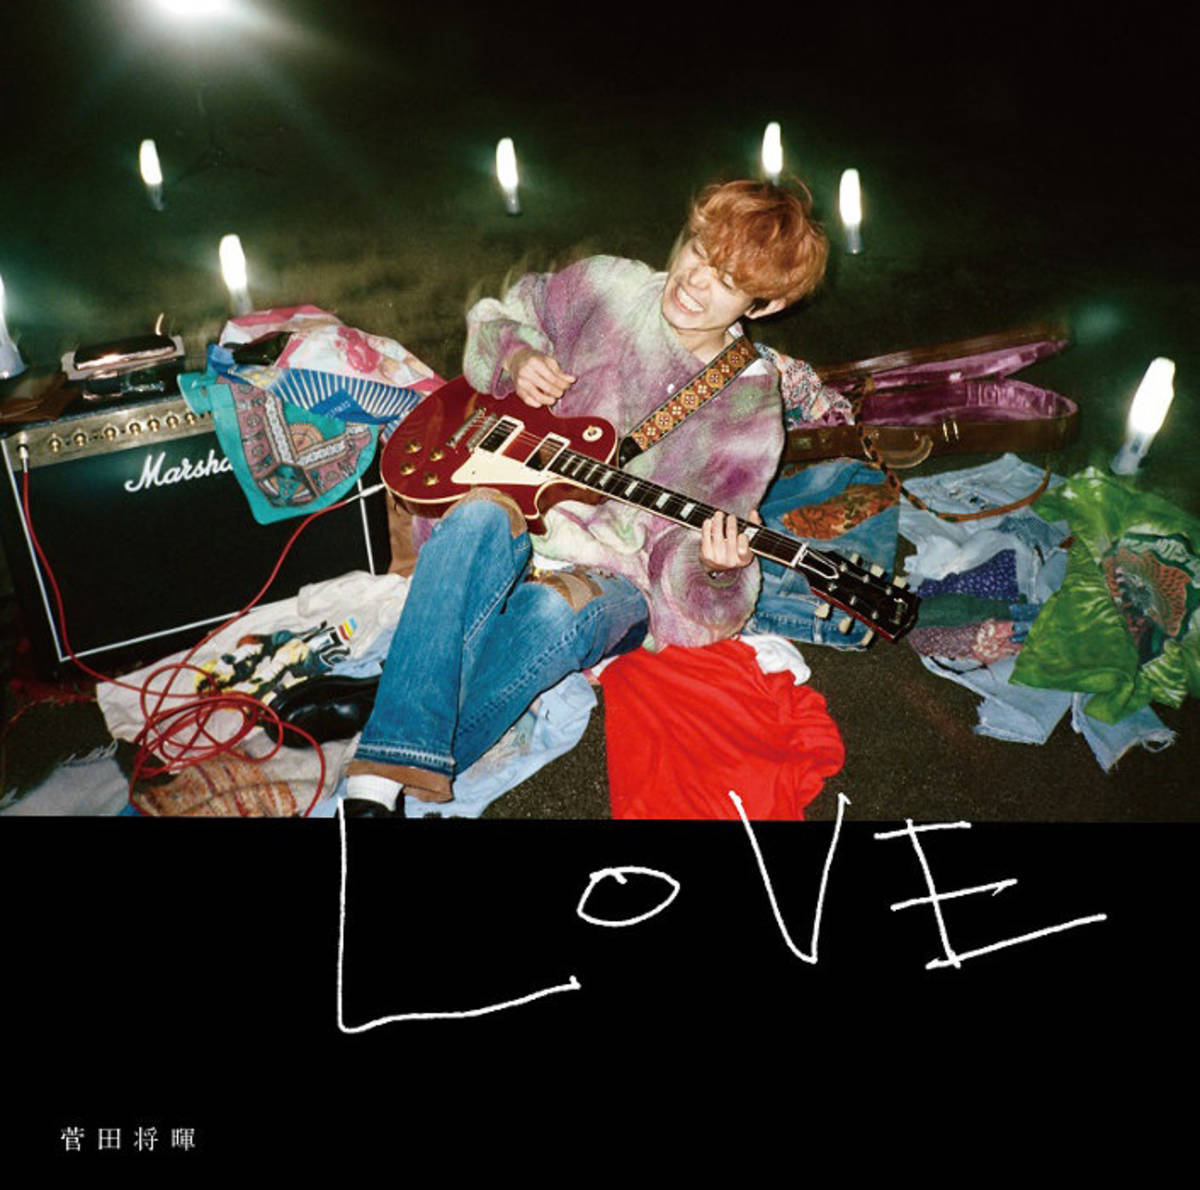 Cover art for『Masaki Suda - Baby』from the release『LOVE』